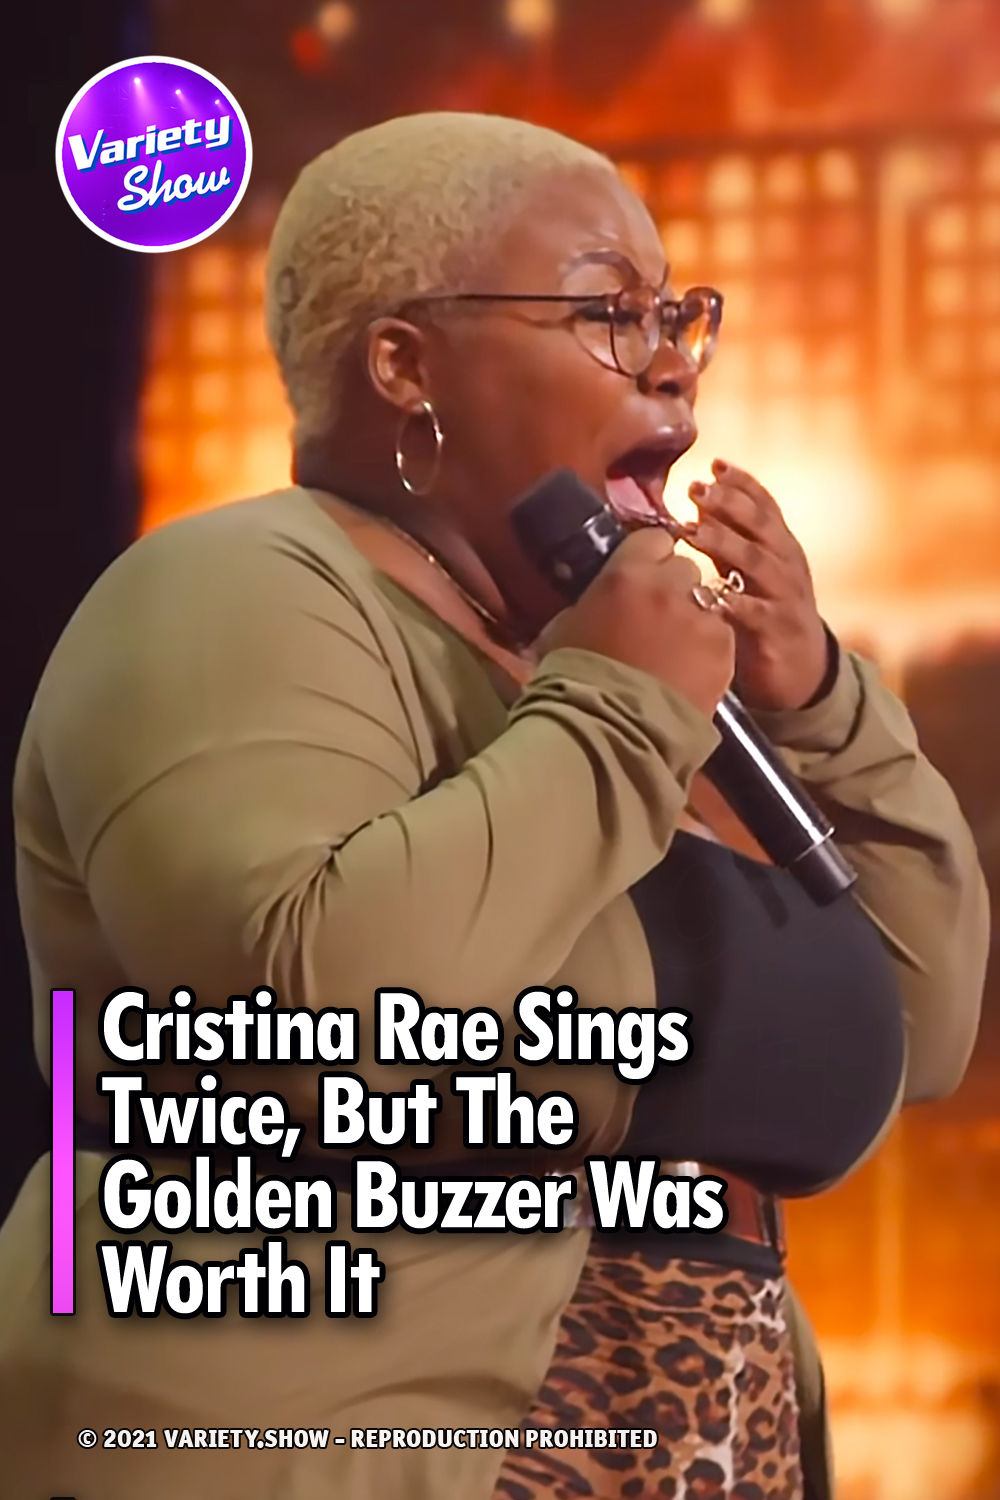 Cristina Rae Sings Twice, But The Golden Buzzer Was Worth It